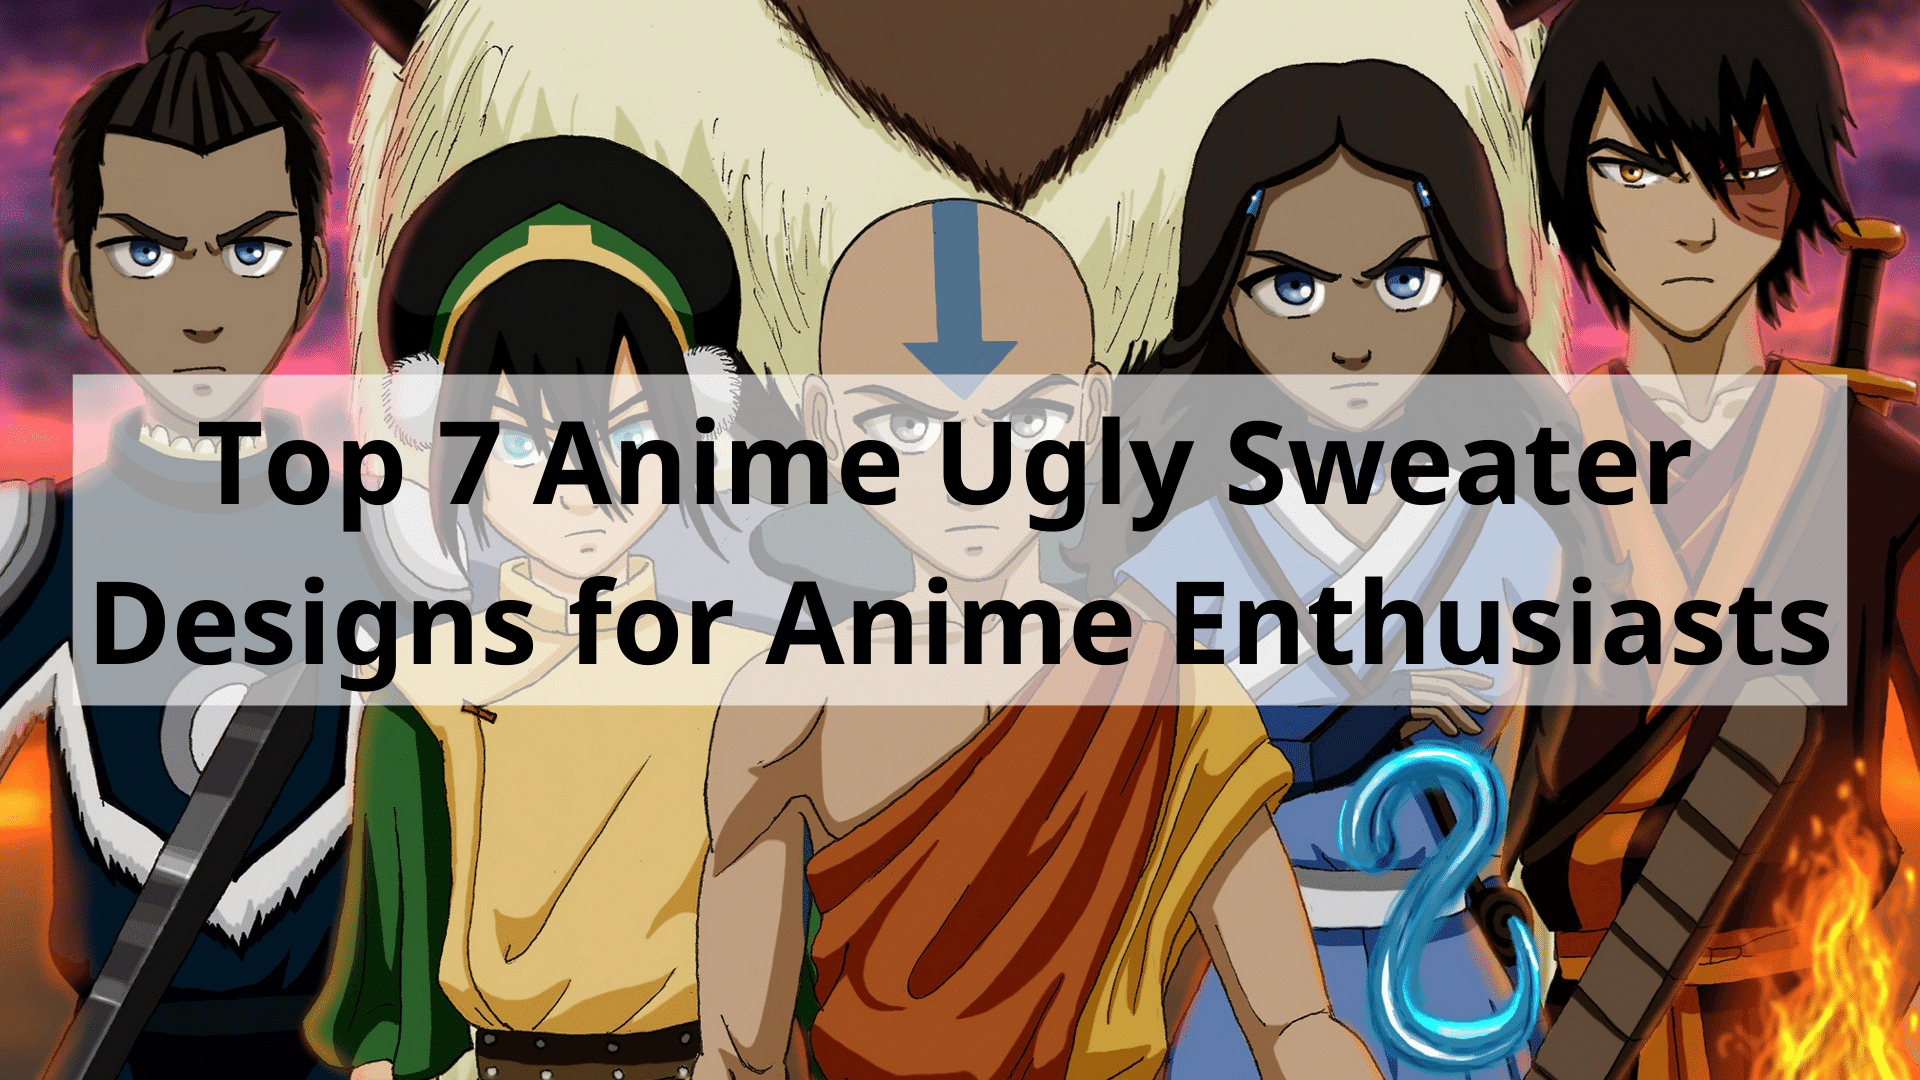 Top 7 Anime Ugly Sweater Designs for Anime Enthusiasts